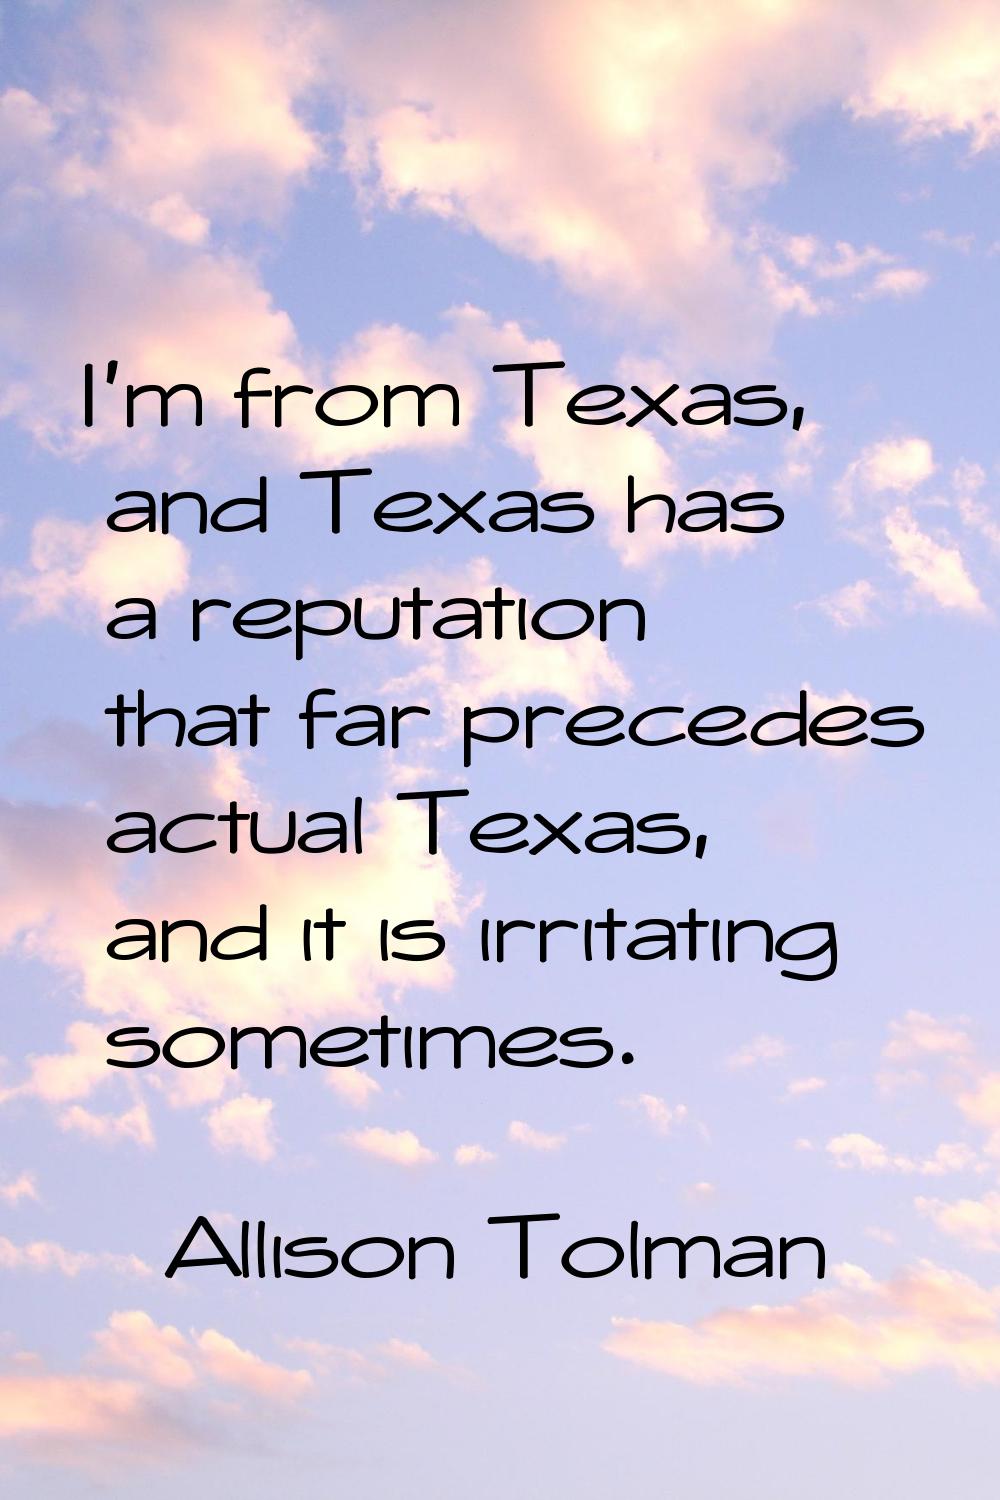 I'm from Texas, and Texas has a reputation that far precedes actual Texas, and it is irritating som